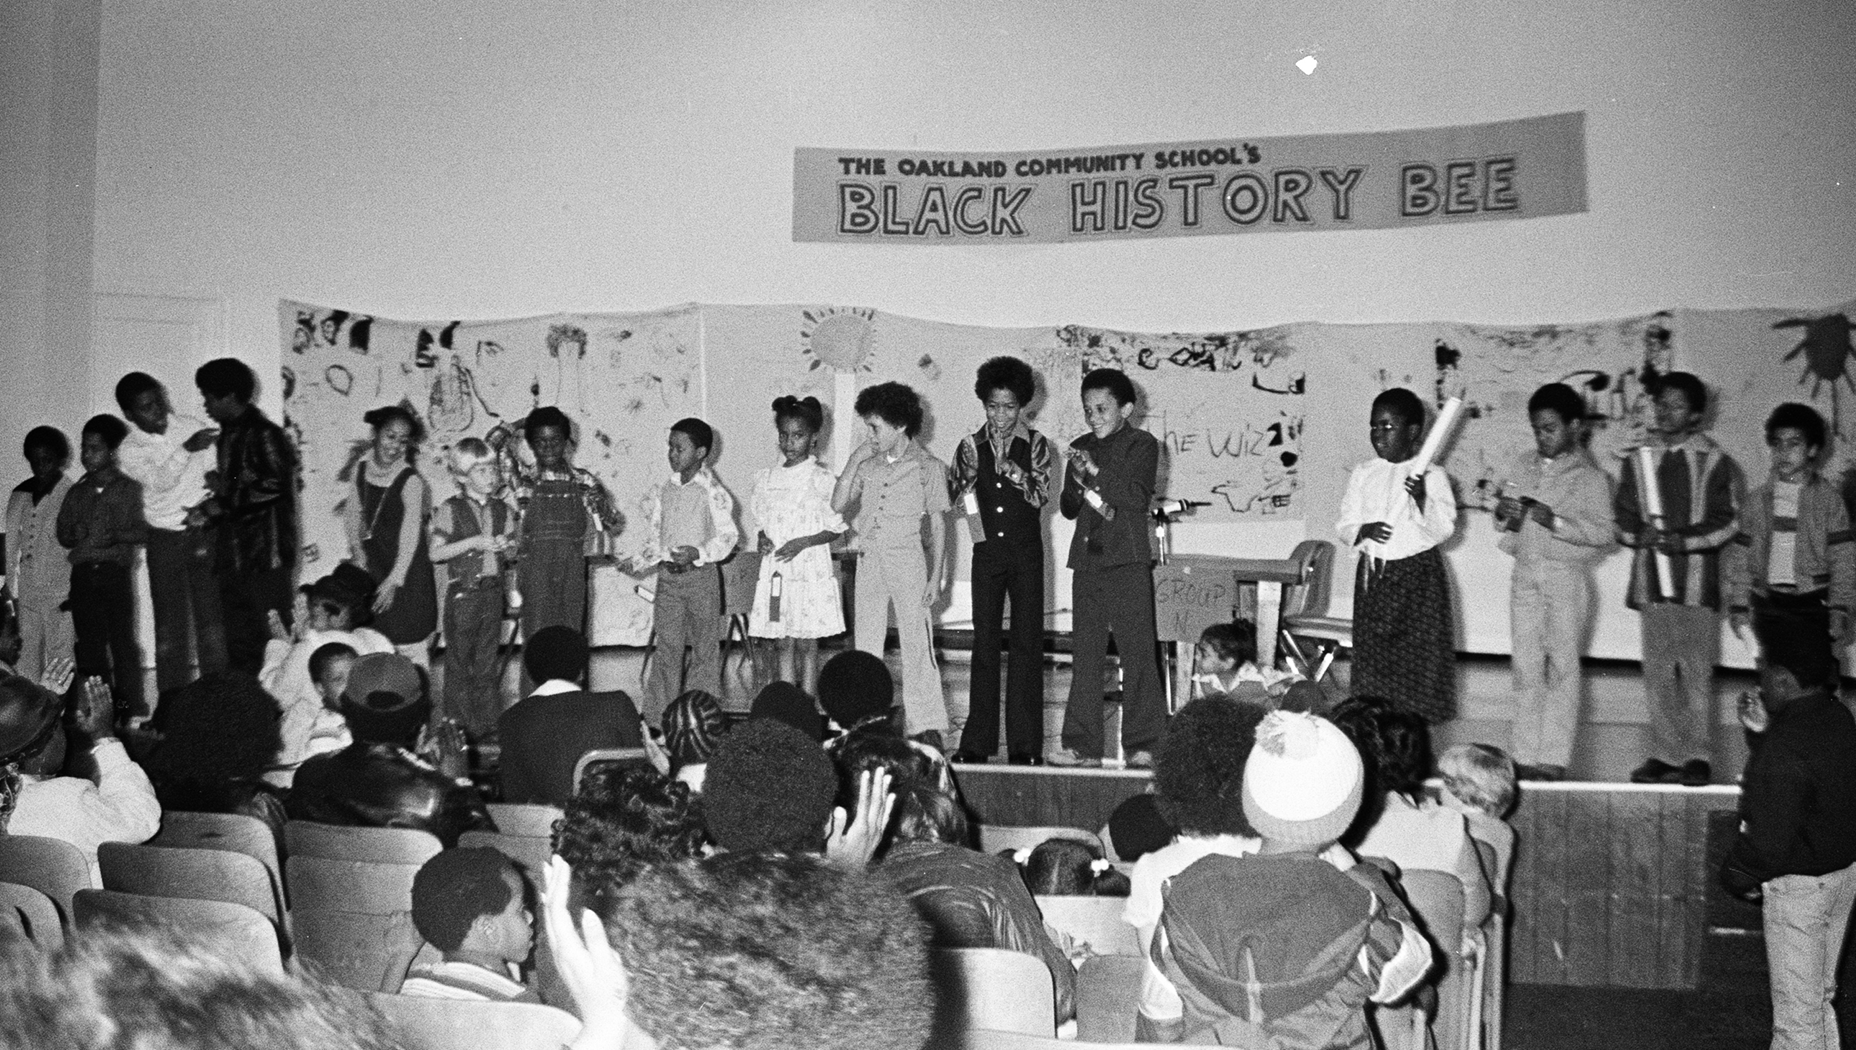 A black and white photo taken at the OCS at a Black History Bee. A group of students stand up on stage in front of an audience.